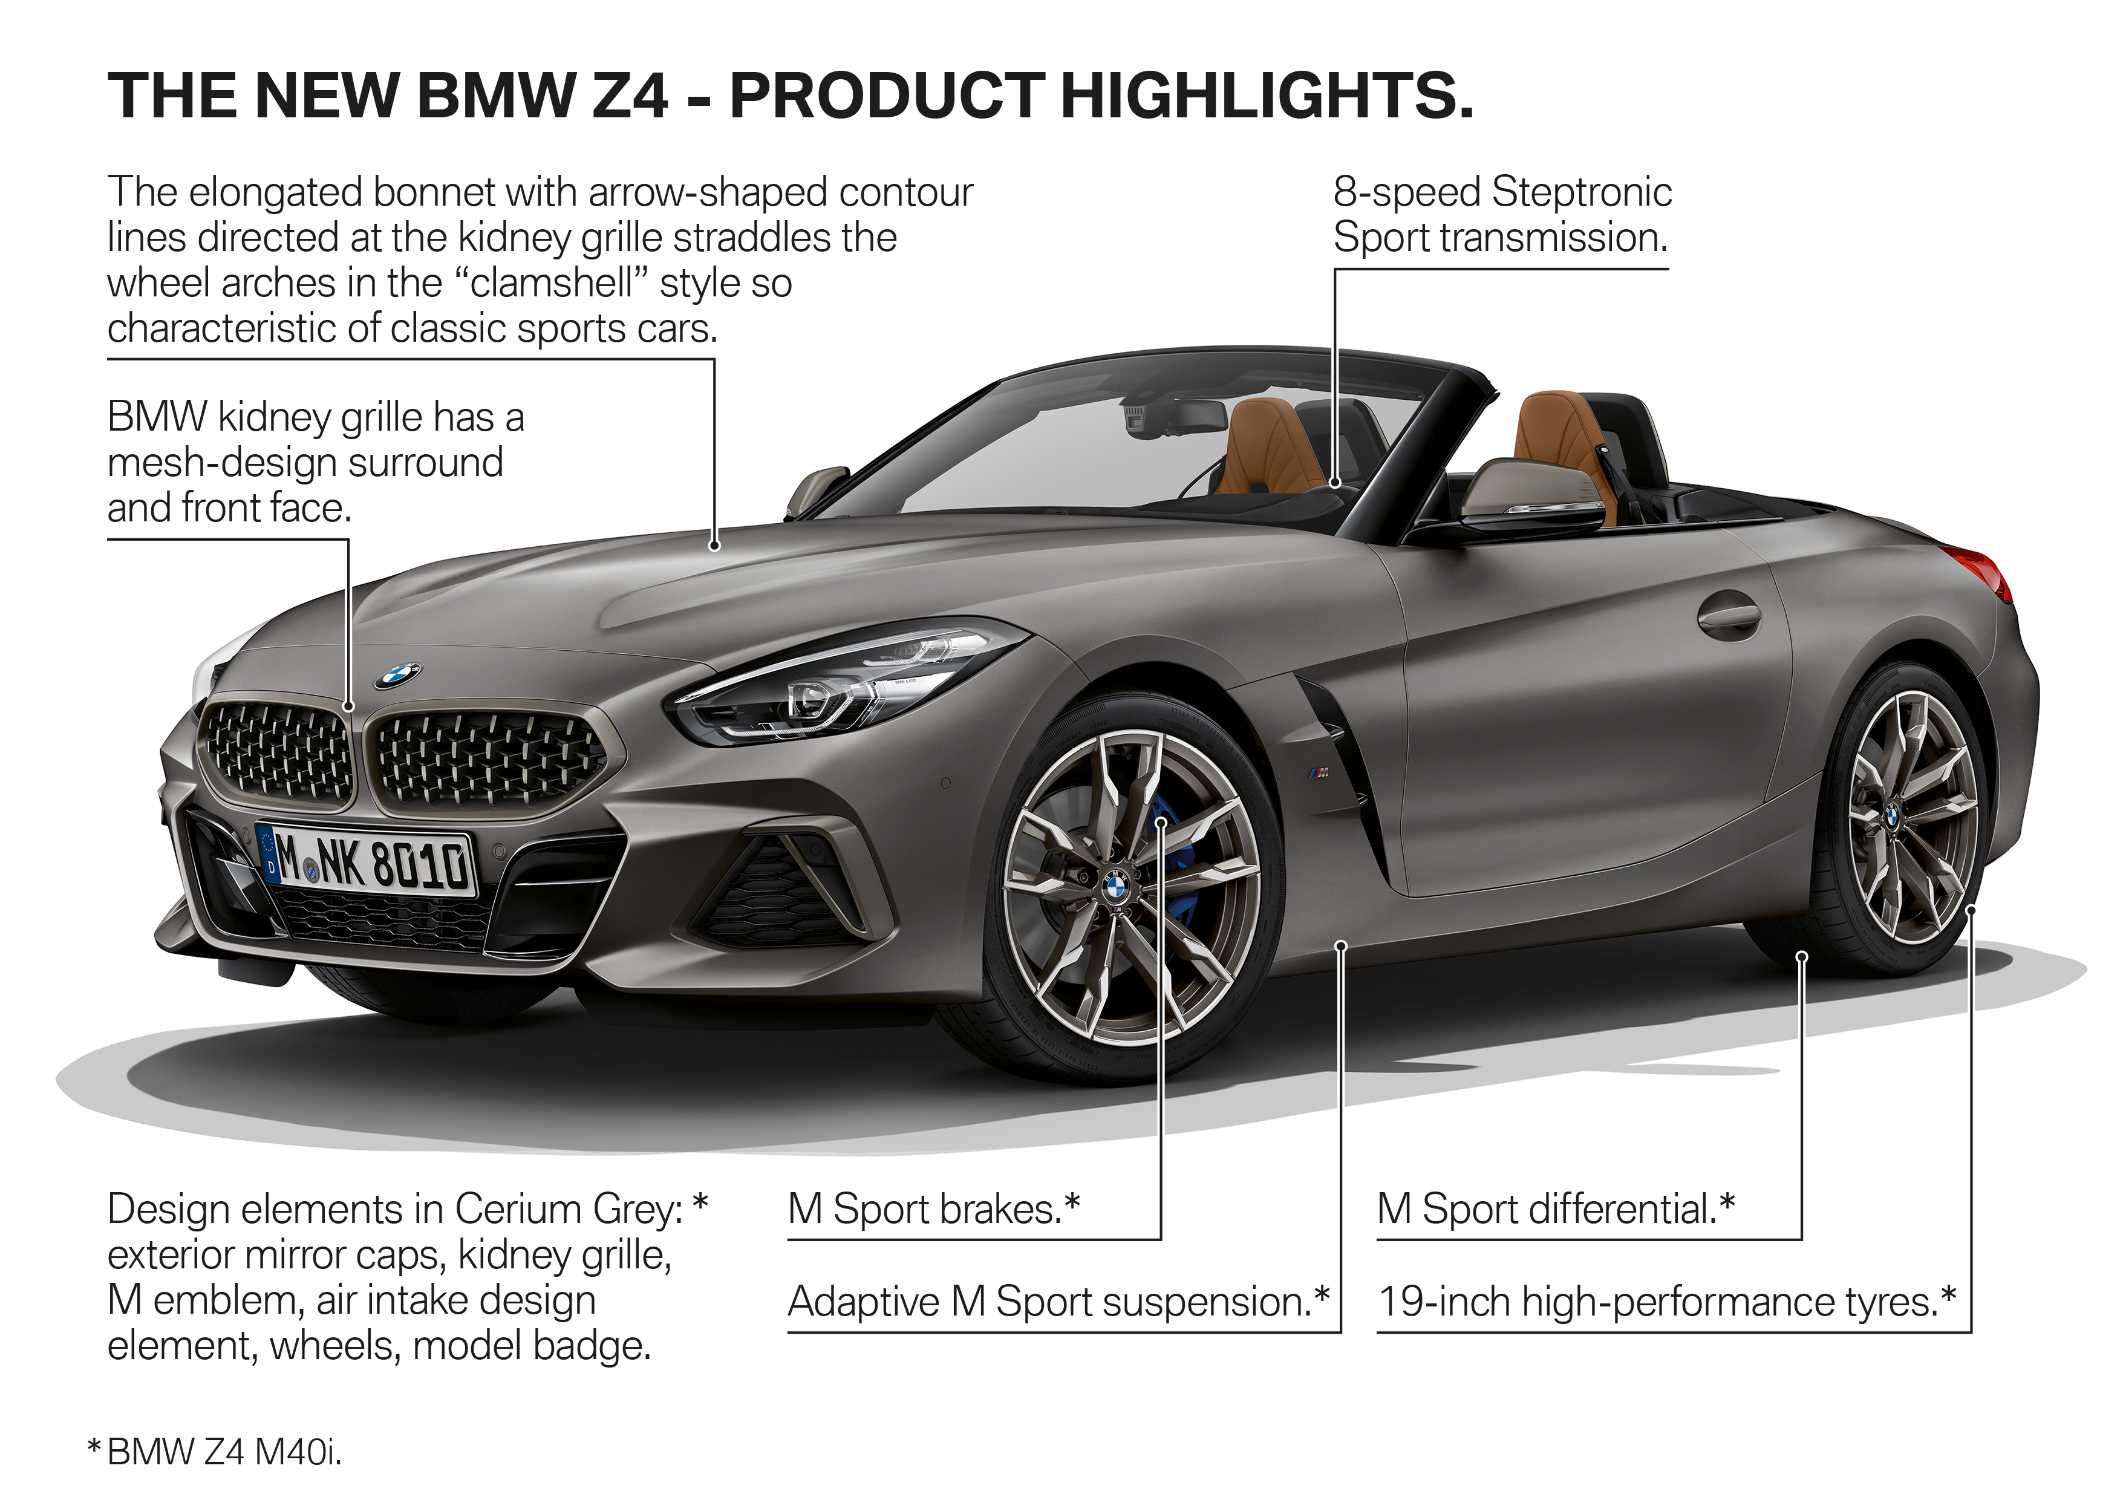 https://mediapool.bmwgroup.com/cache/P9/201809/P90321127/P90321127-the-new-bmw-z4-product-highlights-09-2018-2121px.jpg